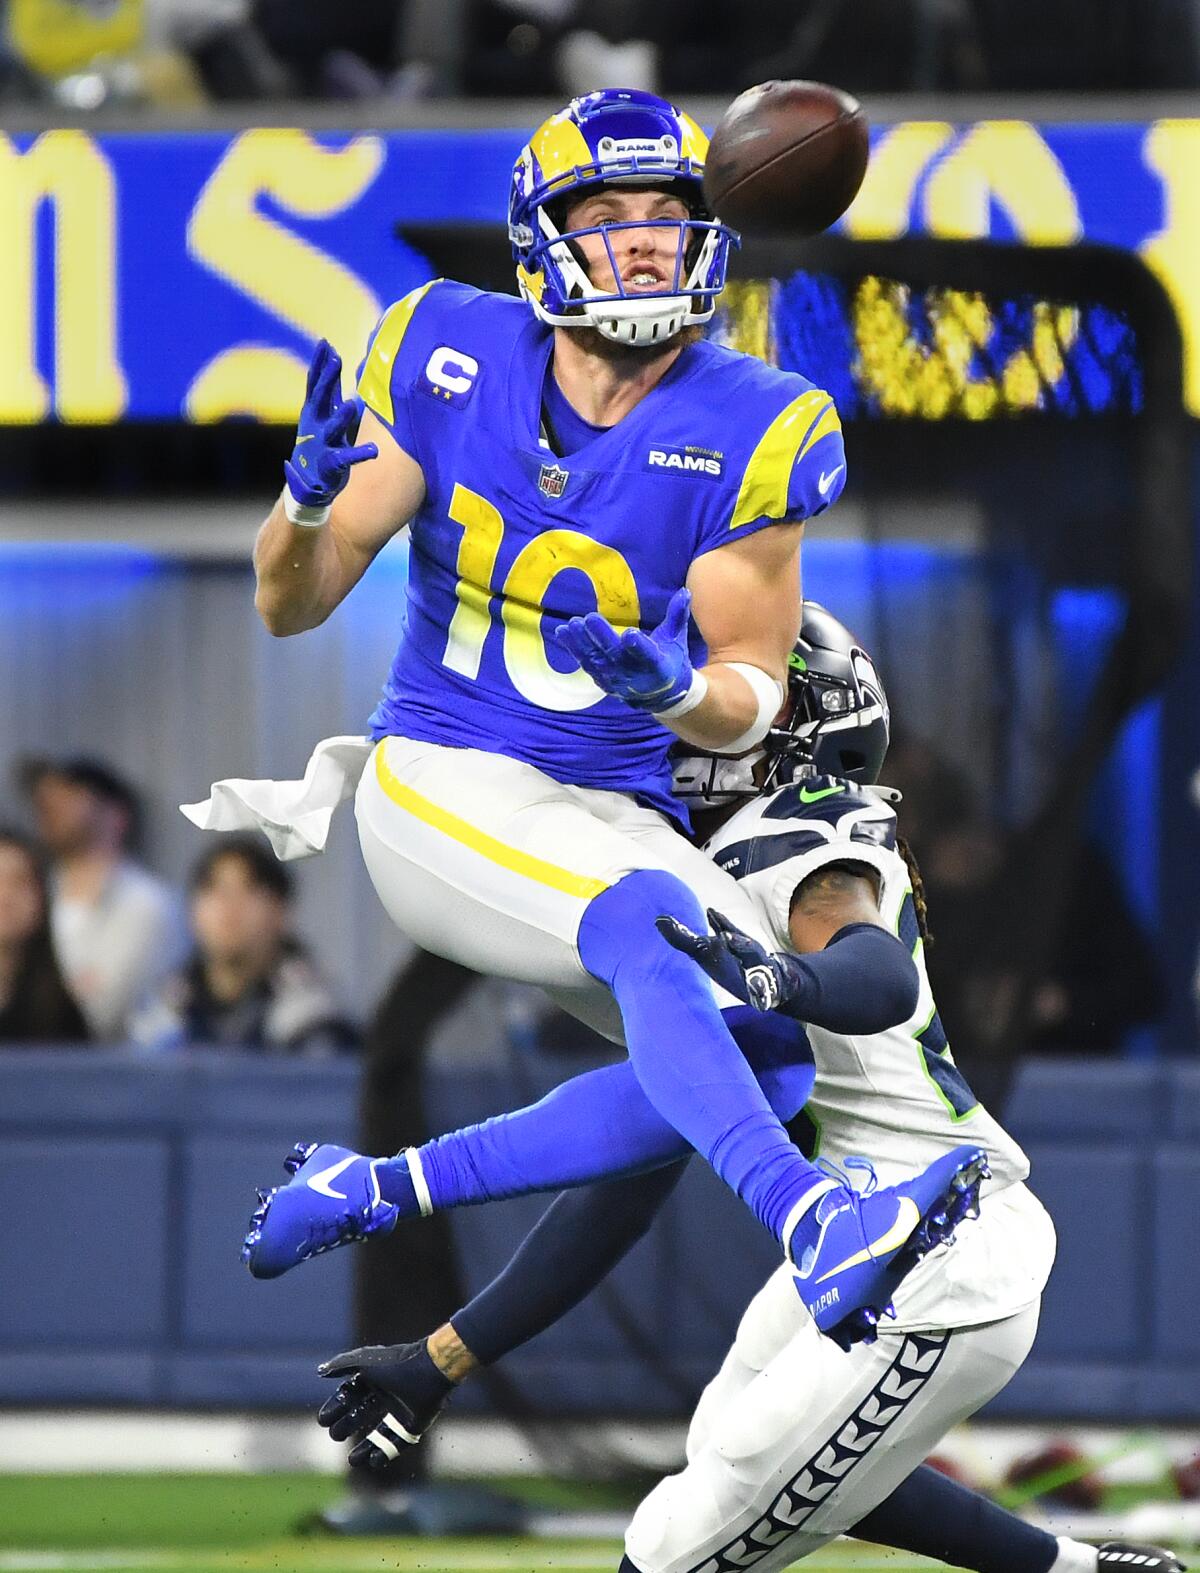 Rams receiver Cooper Kupp makes a catch in front of Seahawks cornerback Sidney Jones in the third quarter.